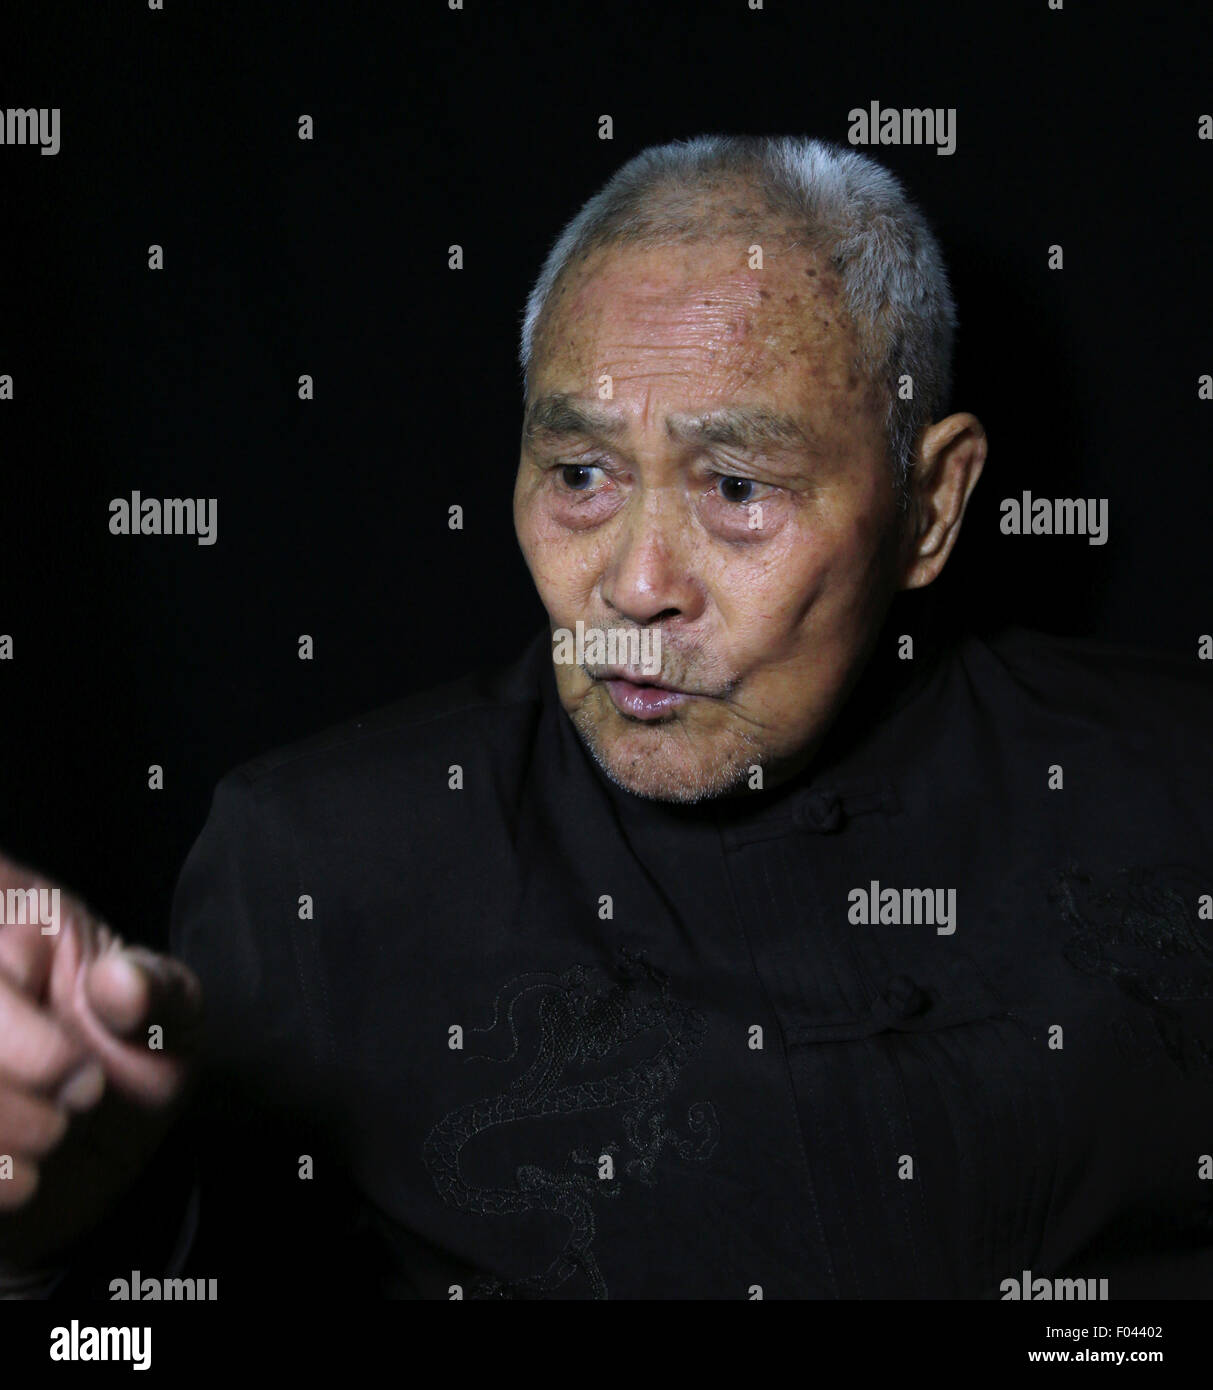 Chn. 25th Mar, 2015. CHINA - March 25 2015: (EDITORIAL USE ONLY. CHINA OUT)(MINIMUM PRICE: 100 USD) Chen Wenzhan: Male, born in 1925 and now lives in Xiamen Fujian. After his father died in 1938, he went to Tongan and joined the 4th Detachment 2nd Group as a refugee. After 2 months, he turned into a second sergenant using 79 type rifle in 4th company 2nd Battalion 3rd Regiment 2nd Brigade 20th Division new Fujian Army, whose height only 10 cm higher than the rifle. Then joined in 1st Squad 1st platoon 7th company 4rd Battalion 120 th regiment 40th division 25th corp National Revolutionary Ar Stock Photo